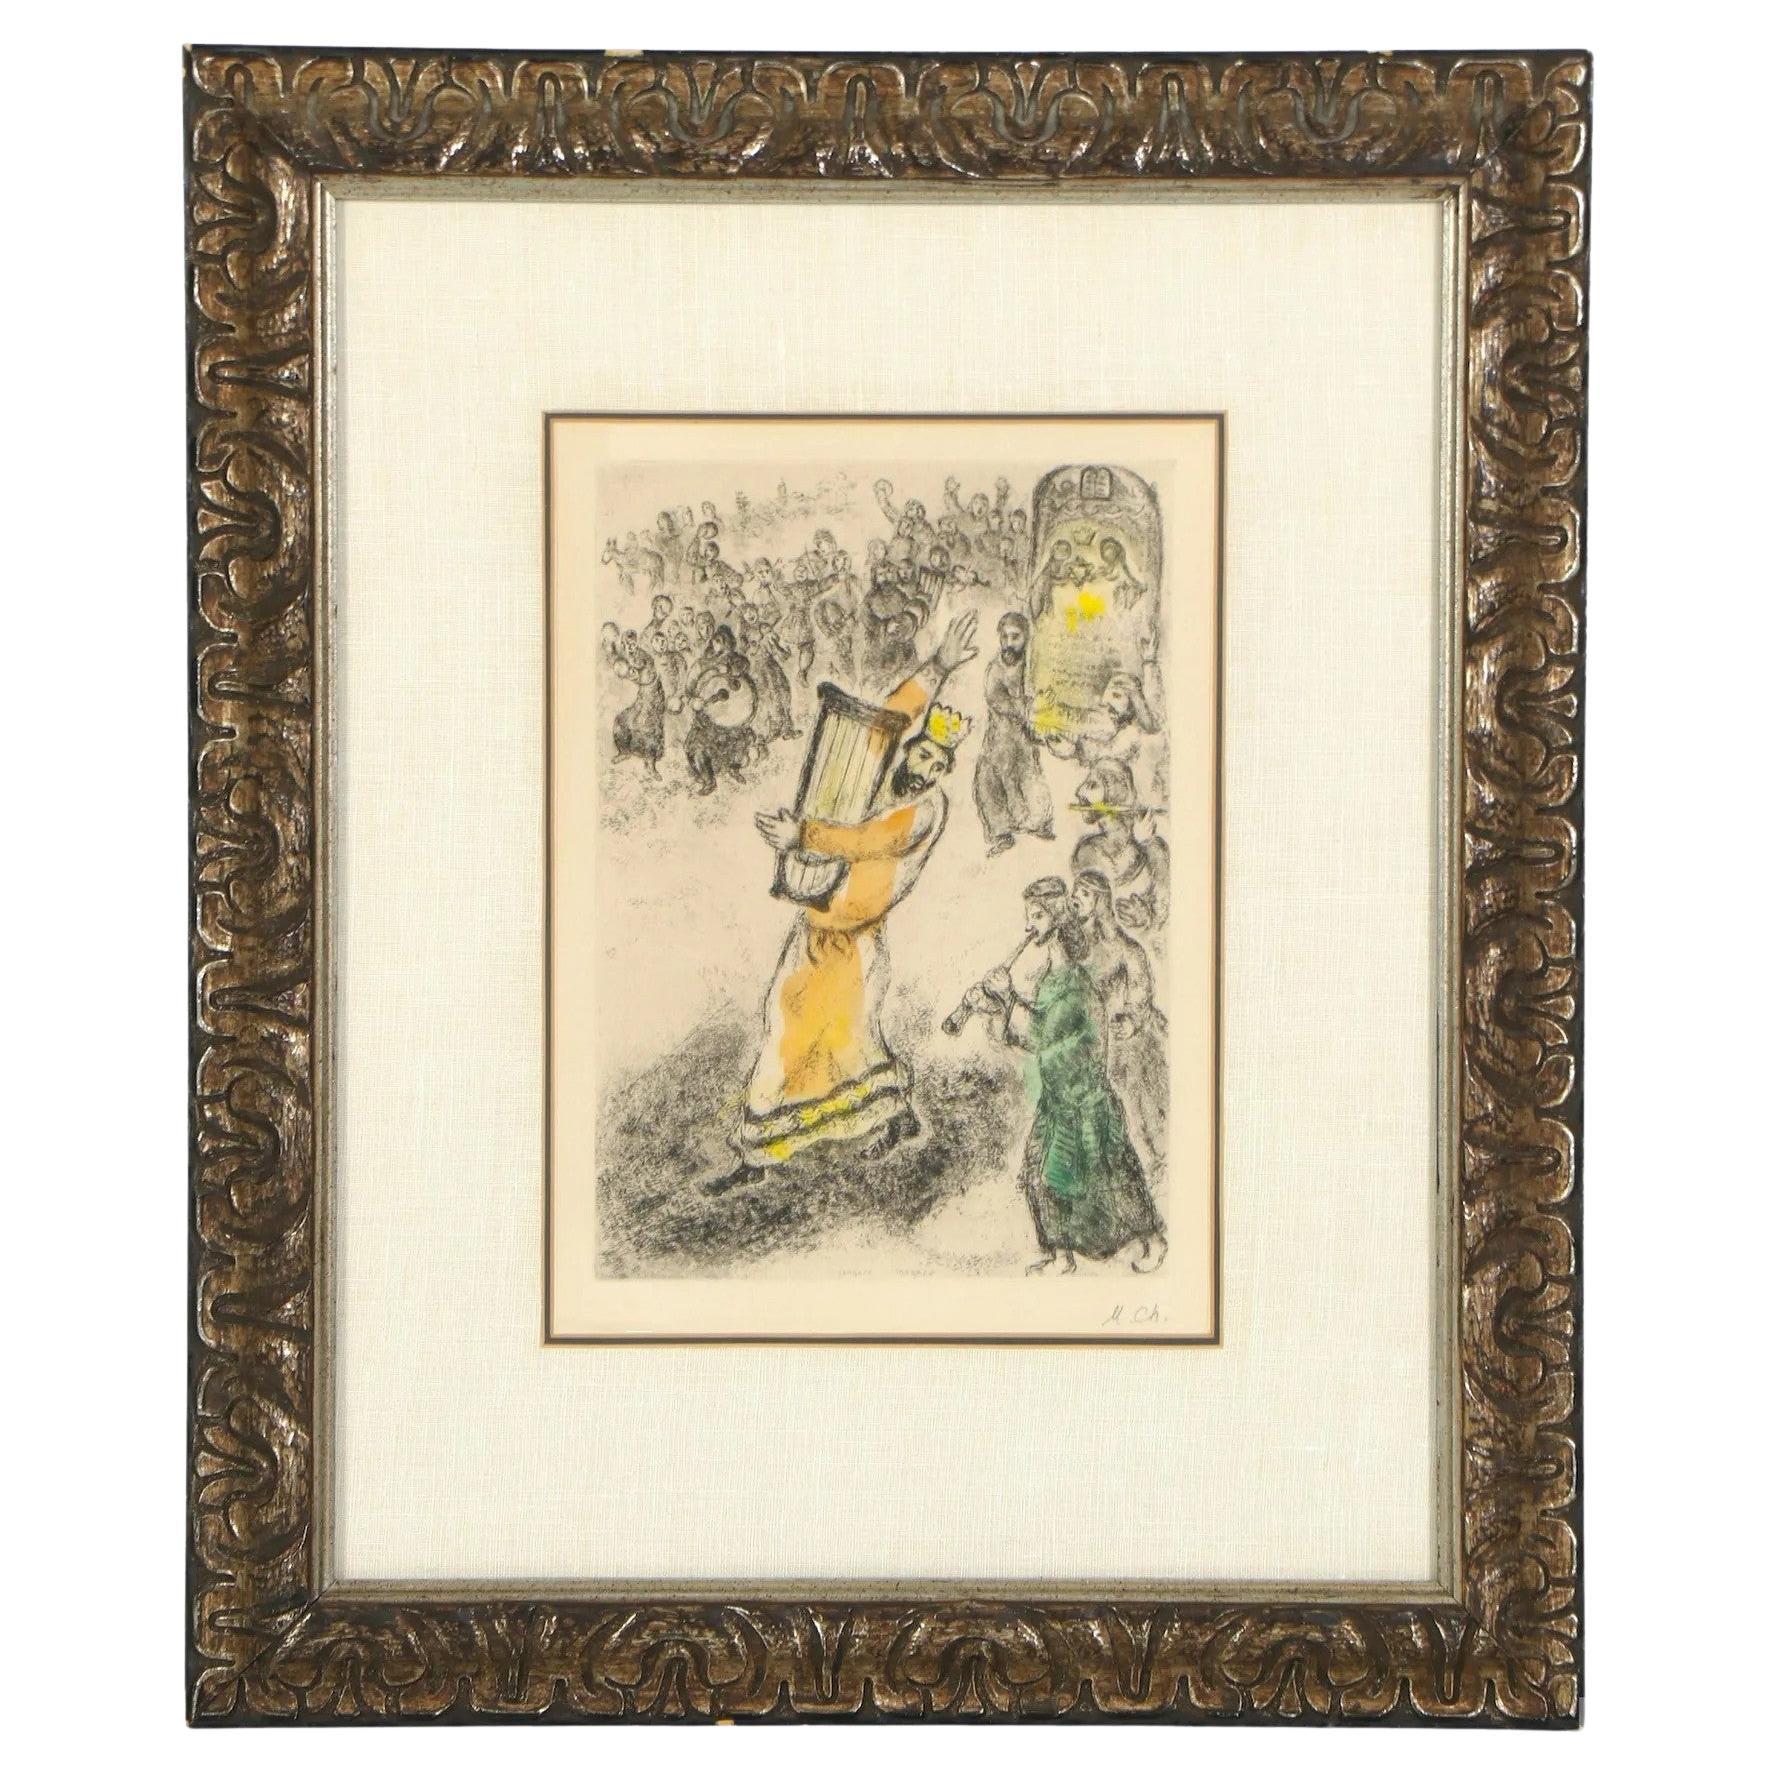 Rare Original Framed Handcolored Marc Chagall Etching Carrying Ark Egypt Exodus  For Sale